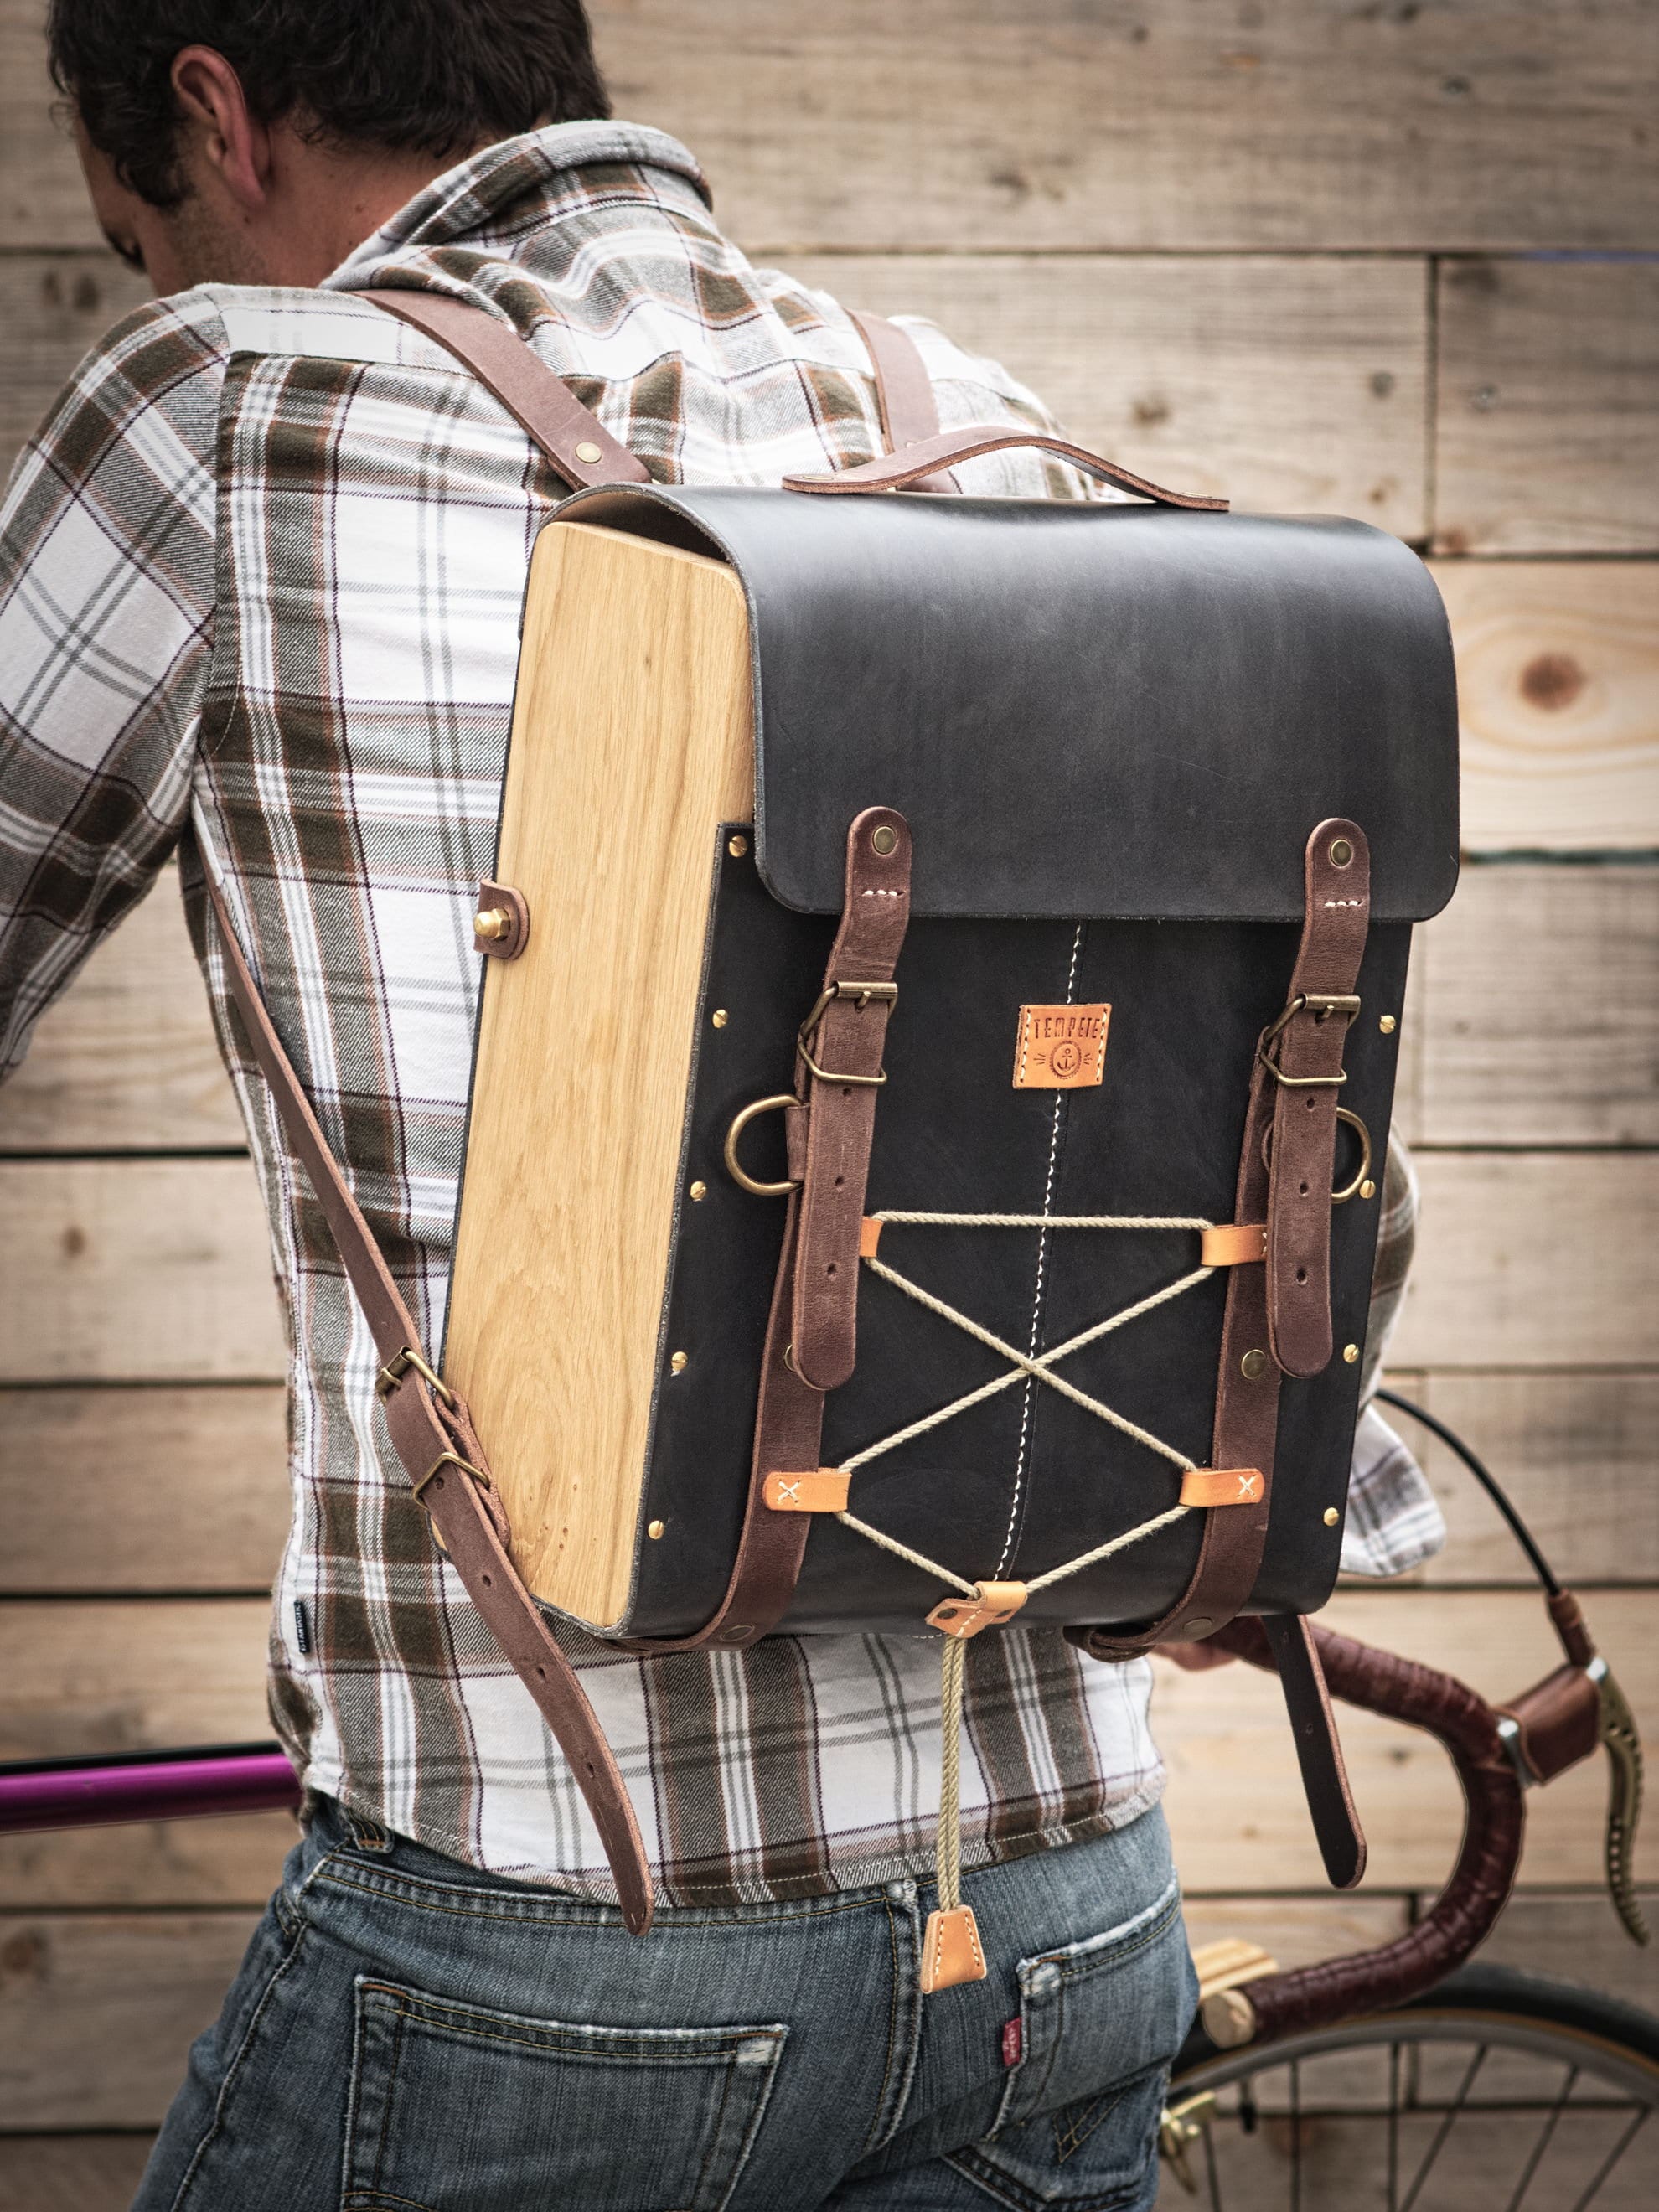 Handmade leather wooden messenger bag, convertible leather shoulder  backpack, 8.6 * 7 * 2.3 inches, unisex leather bag, painter backpack,  writer